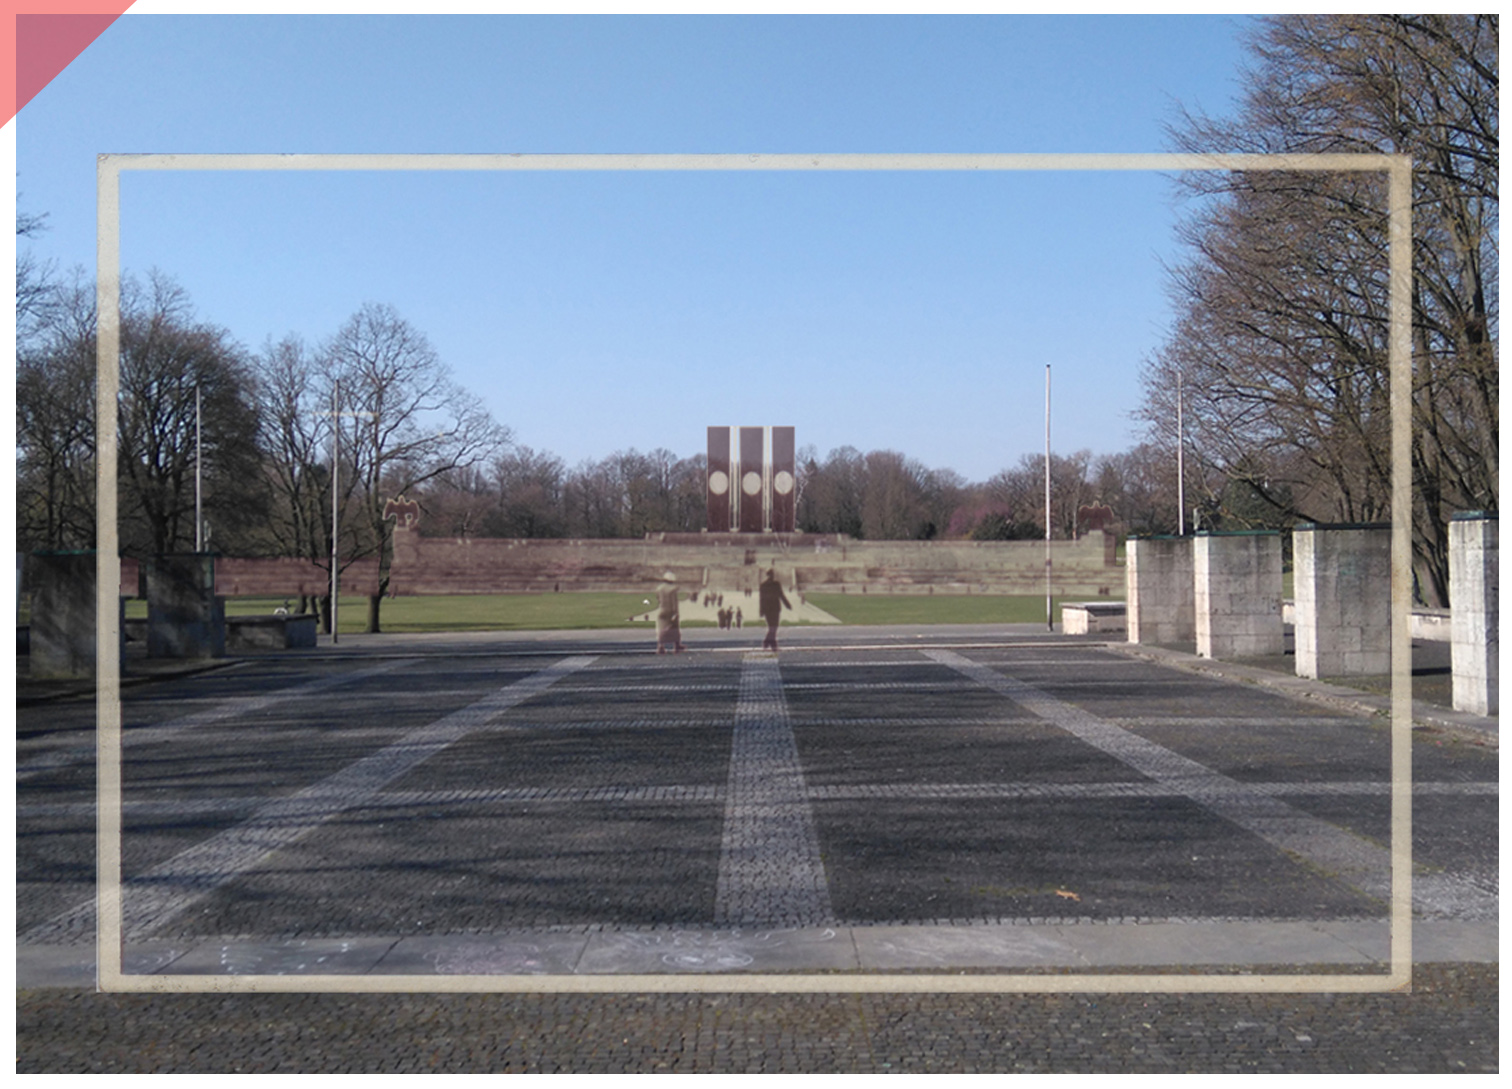 Luitpold-arena-Nuremberg-Nazi-Party-Rally-Grounds-Hall-of-honor-Then-Now